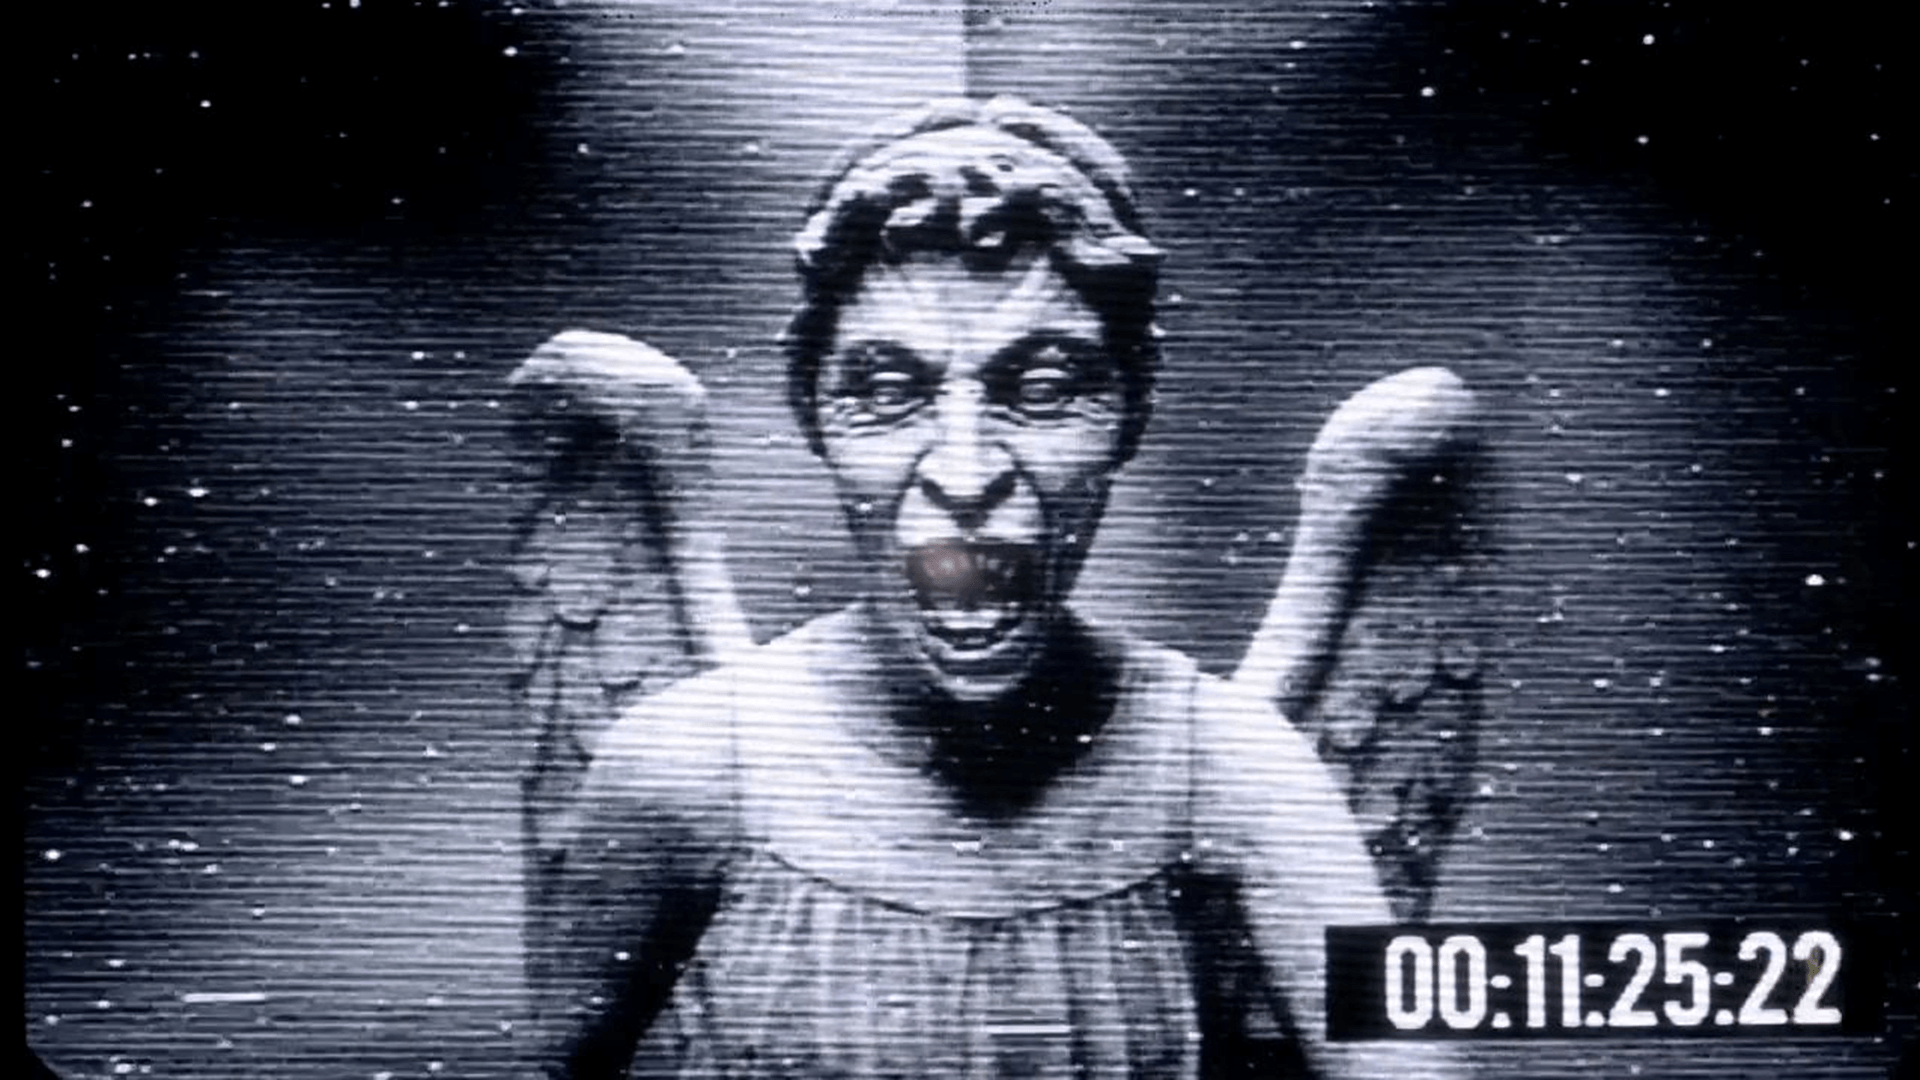 Weeping Angels wallpaper. Set it to change every few seconds